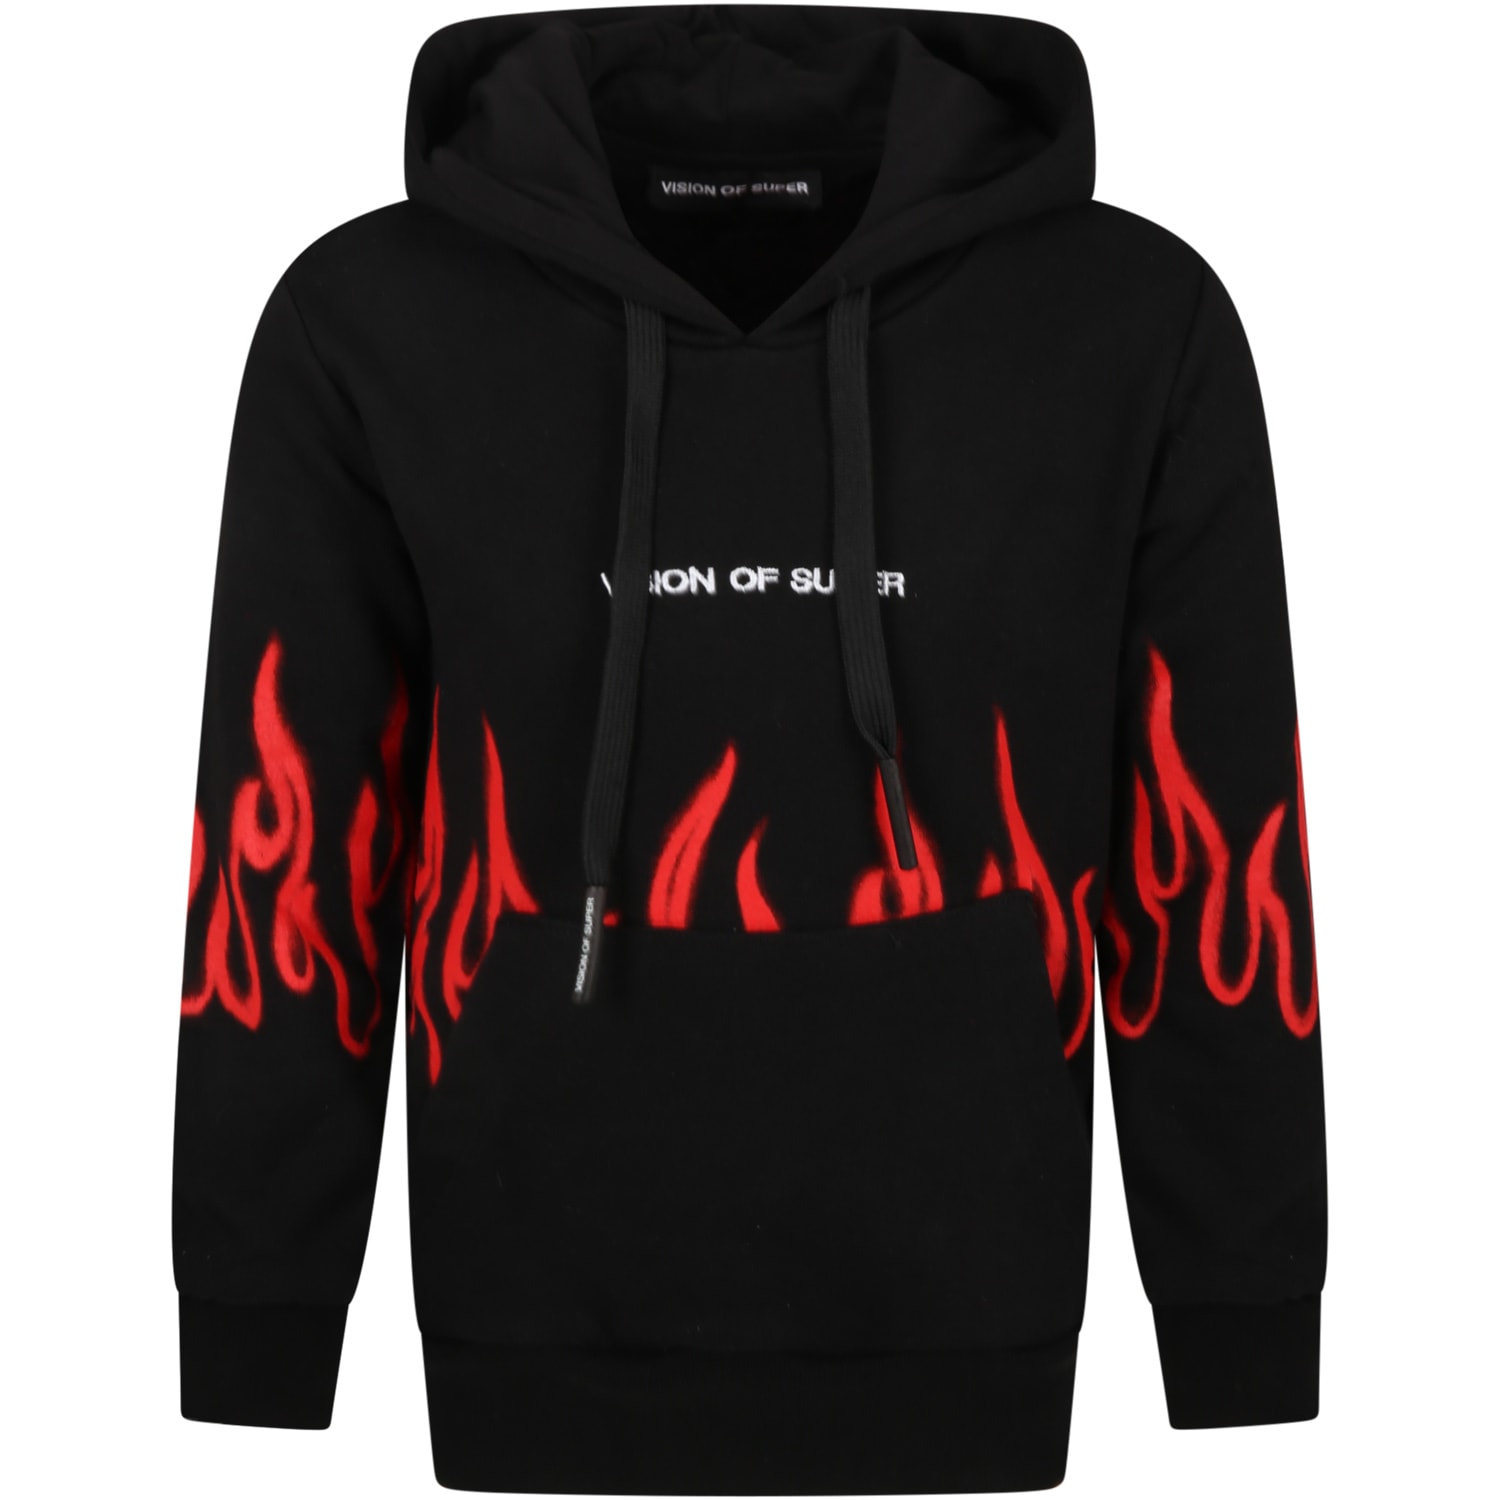 Vision of Super Black Sweatshirt For Kids With White Logo And Red Flames